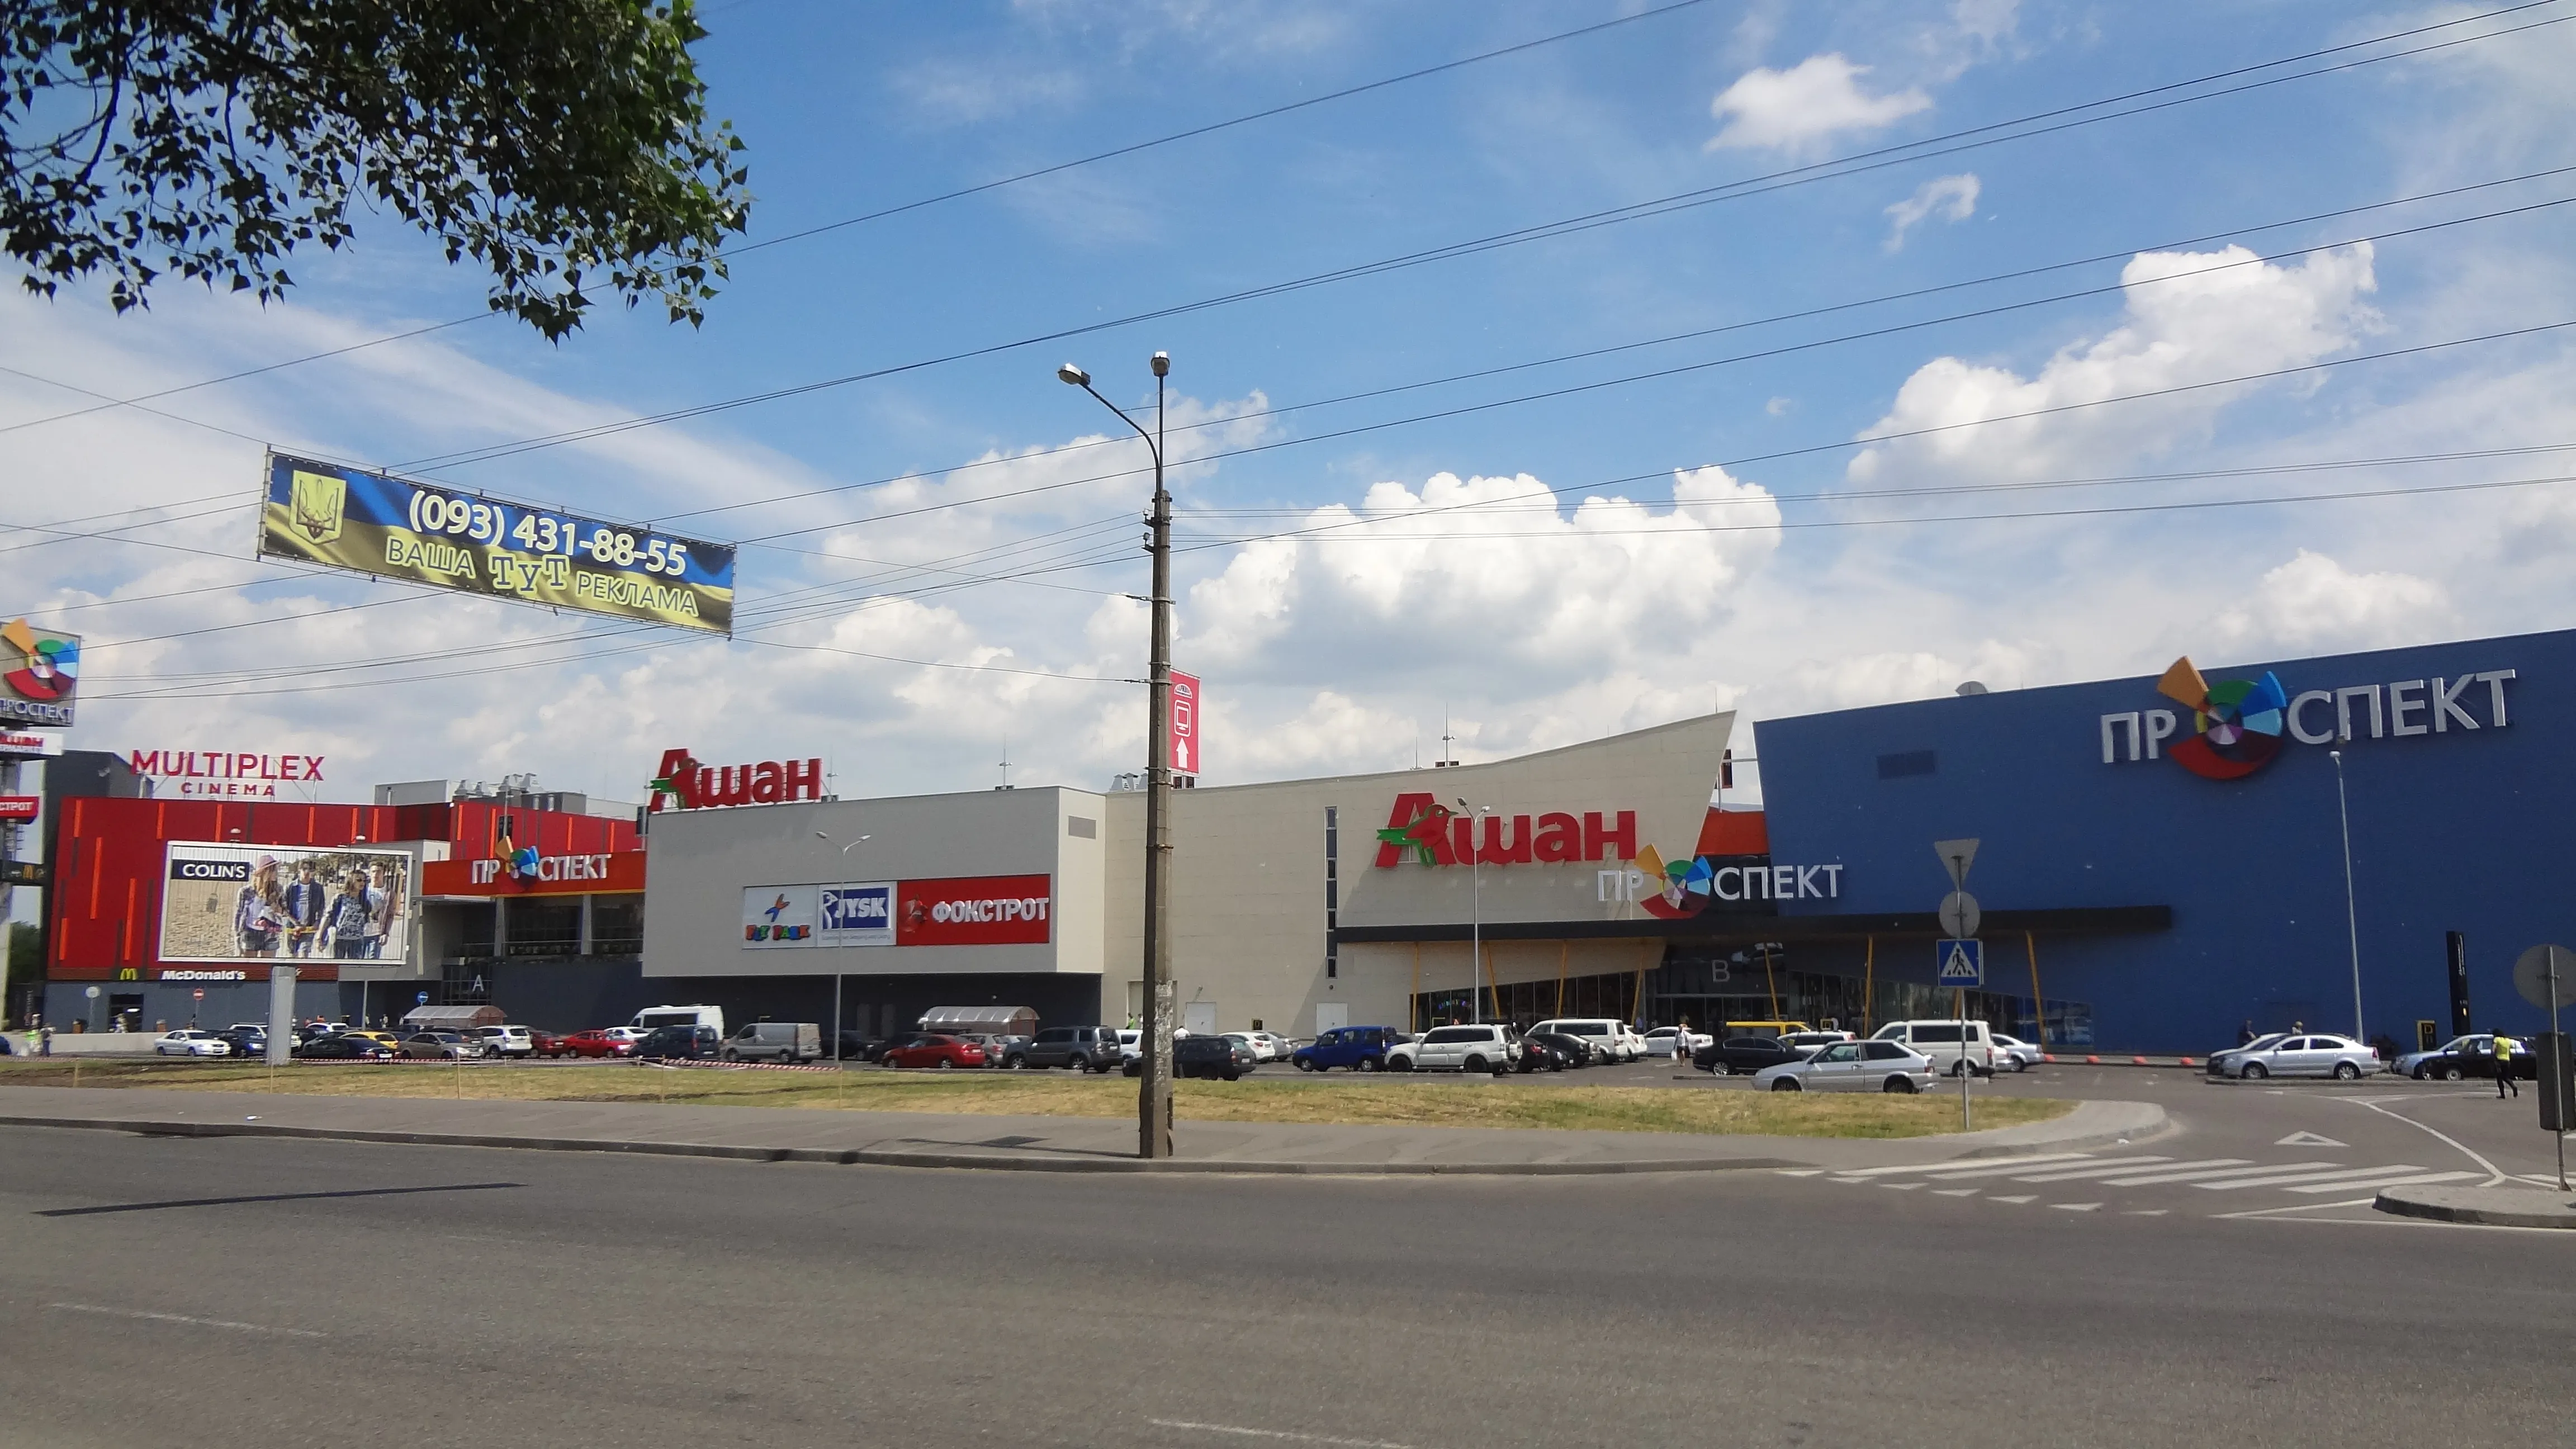 Shopping Center Avenue in Ukraine, europe | Handbags,Shoes,Clothes,Natural Beauty Products,Cosmetics,Sportswear - Country Helper